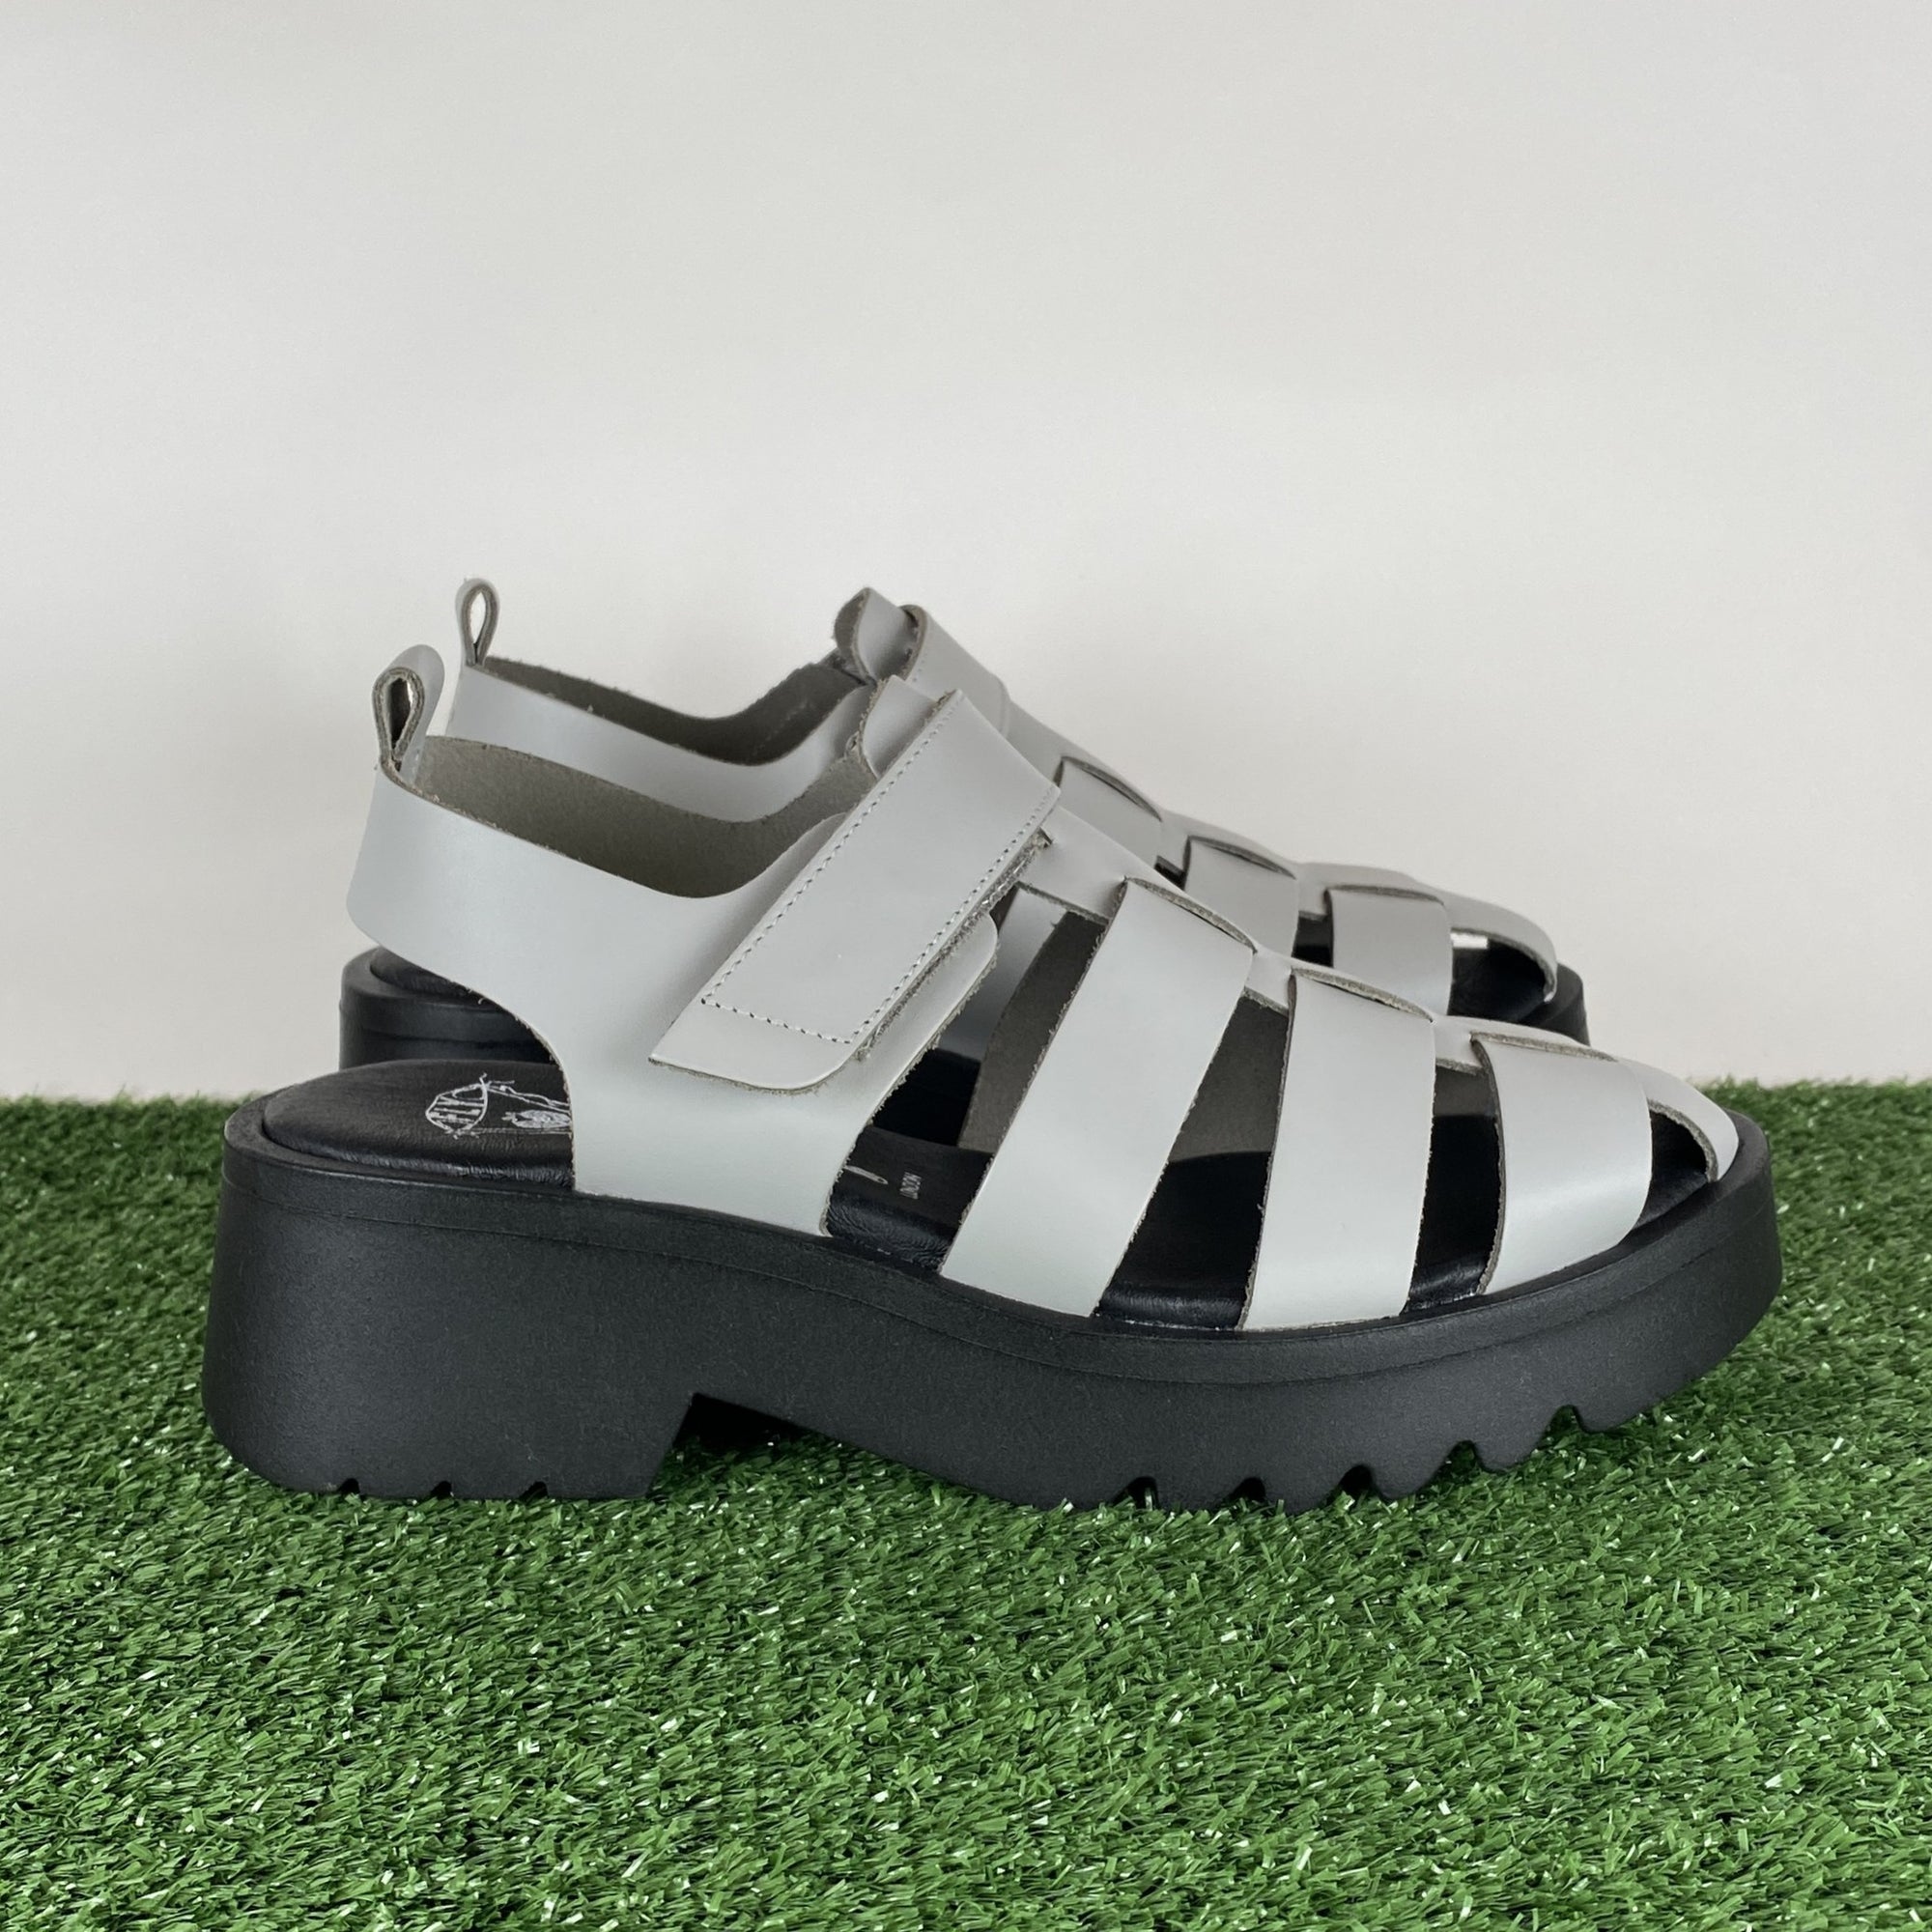 Fly London: Maie, Cloud sizes 38, 39, 40